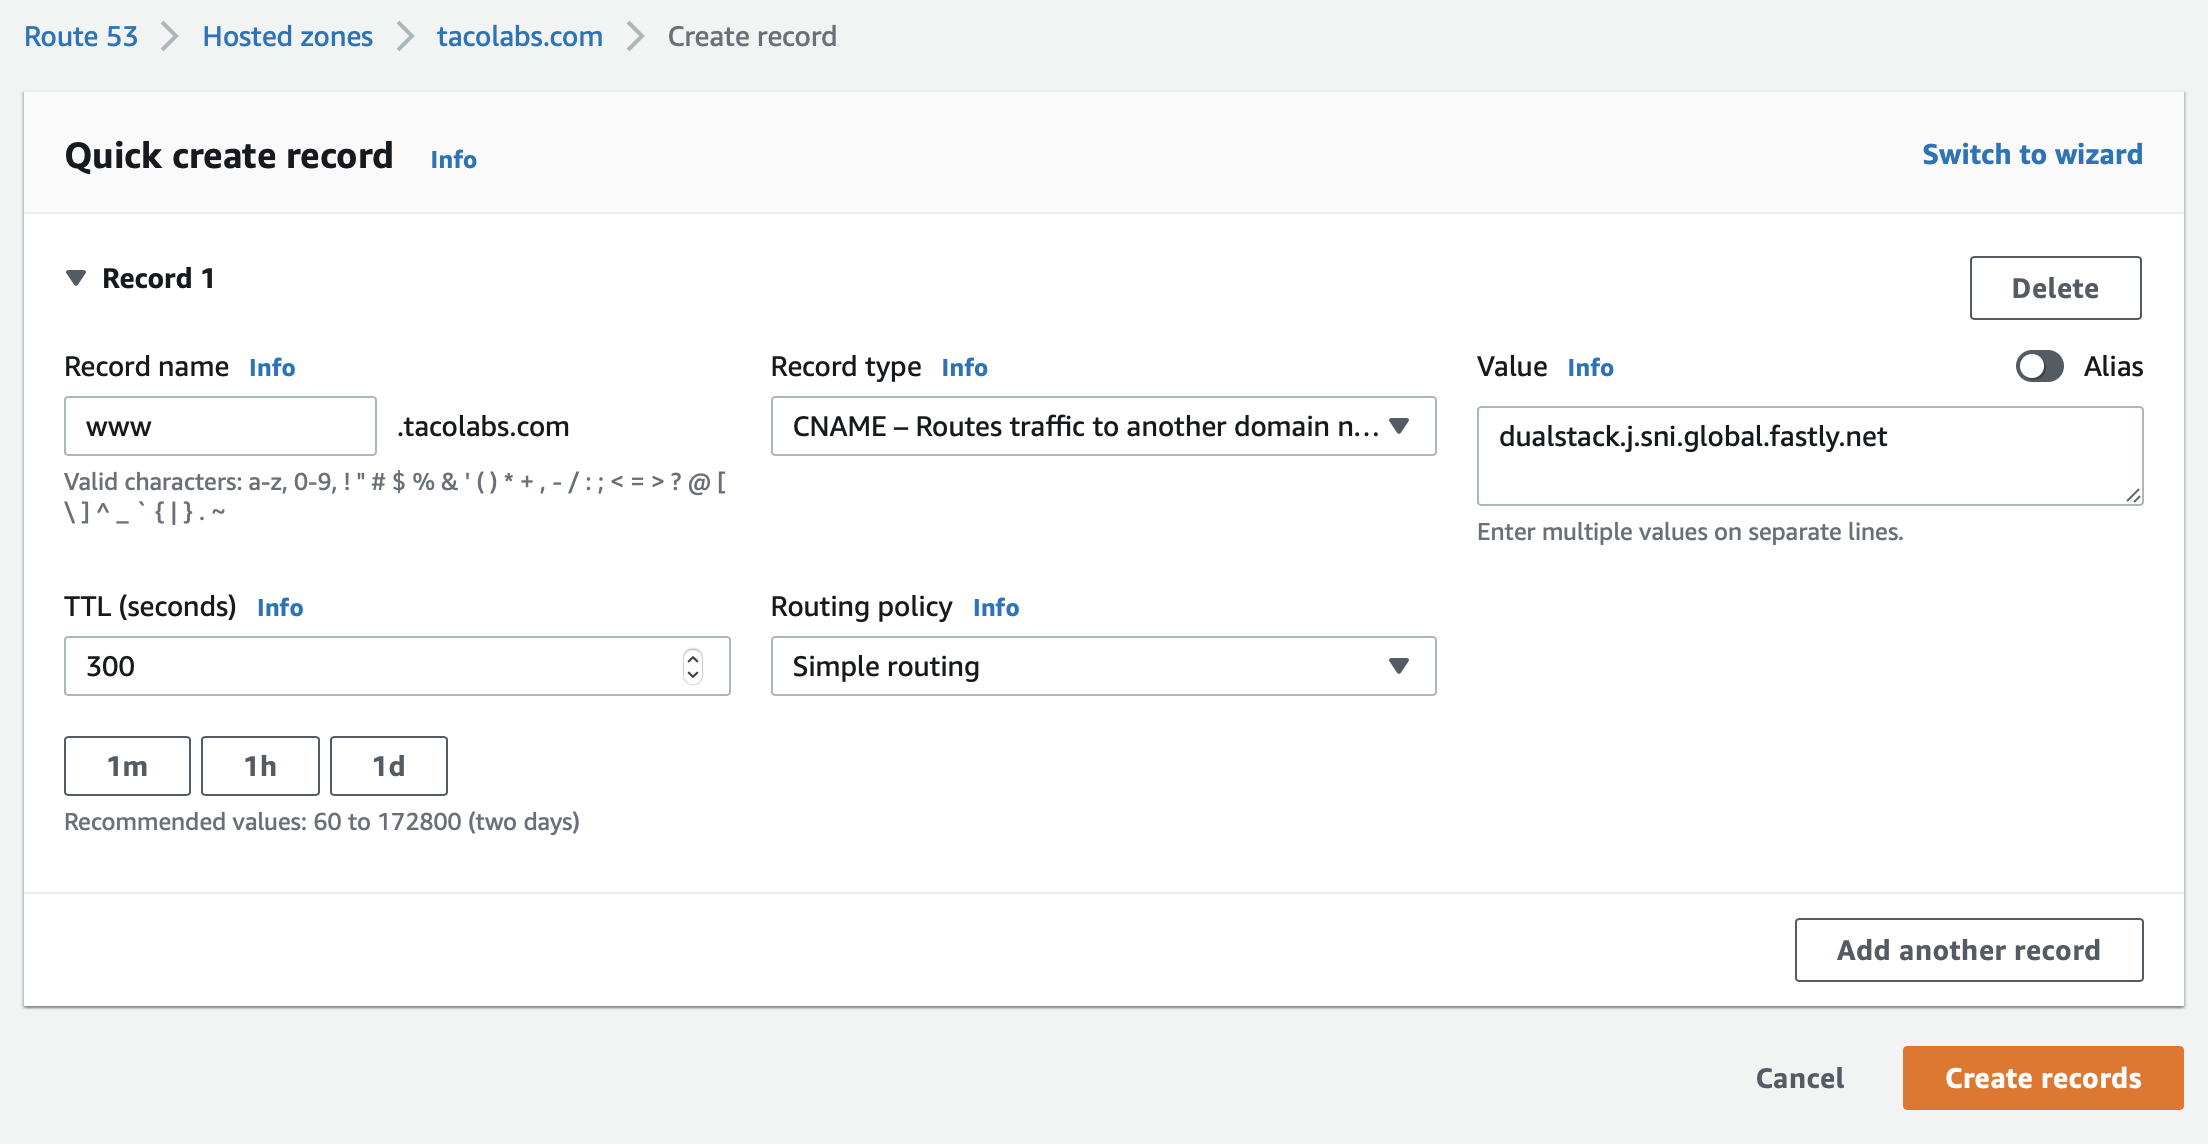 Creating the CNAME record in AWS Route 53